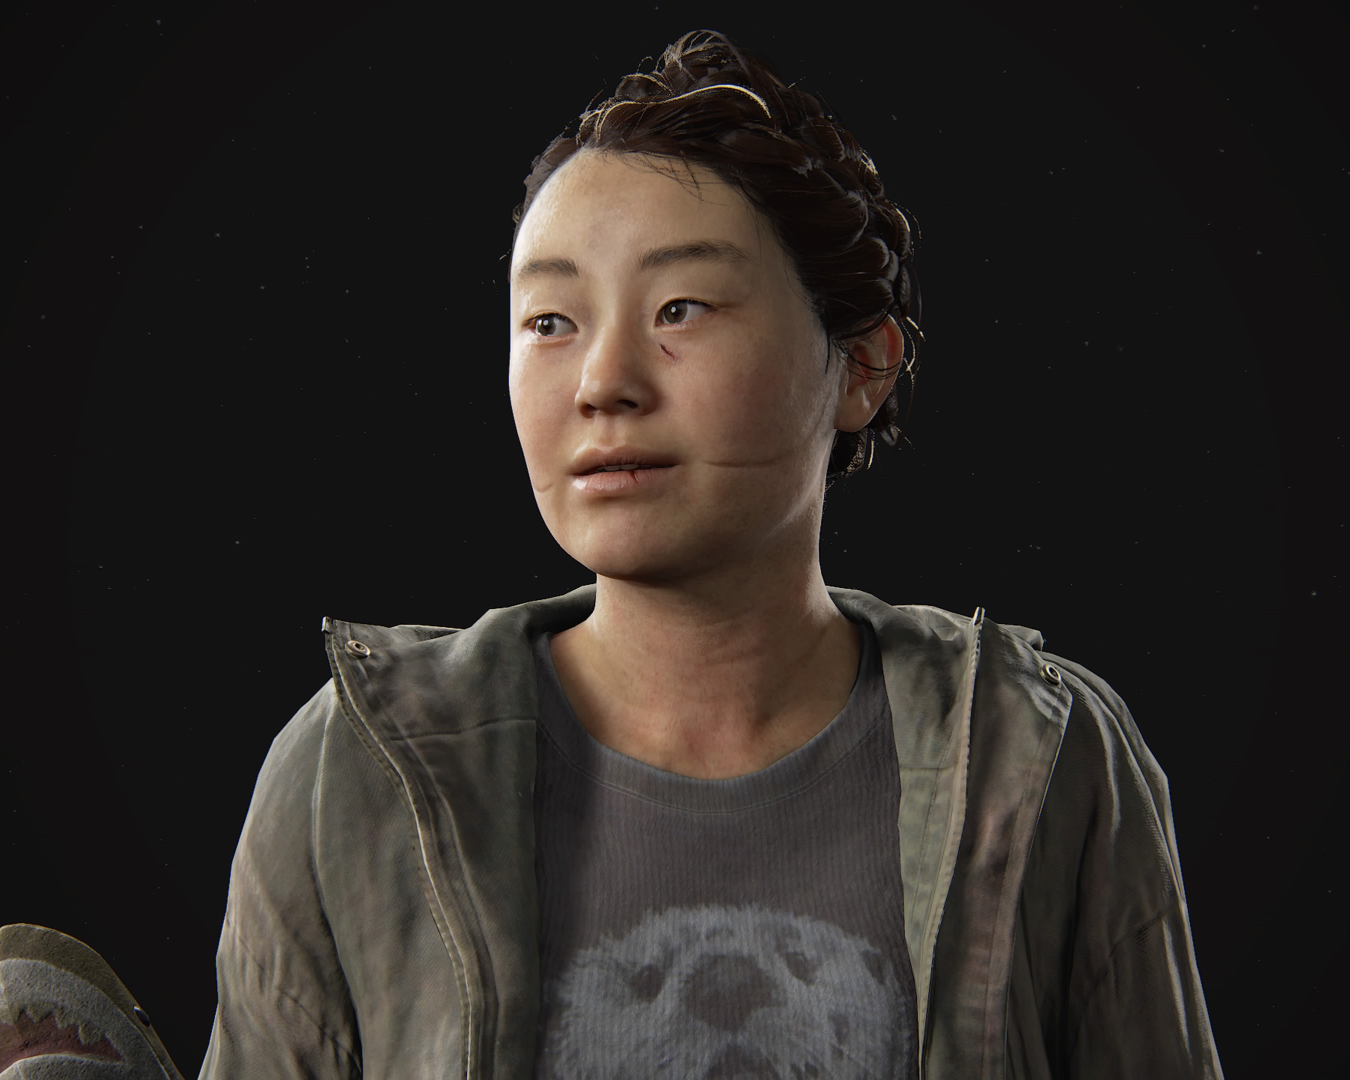 Abby Real Life Actor Face Model & Body Model LAST OF US PART 2 